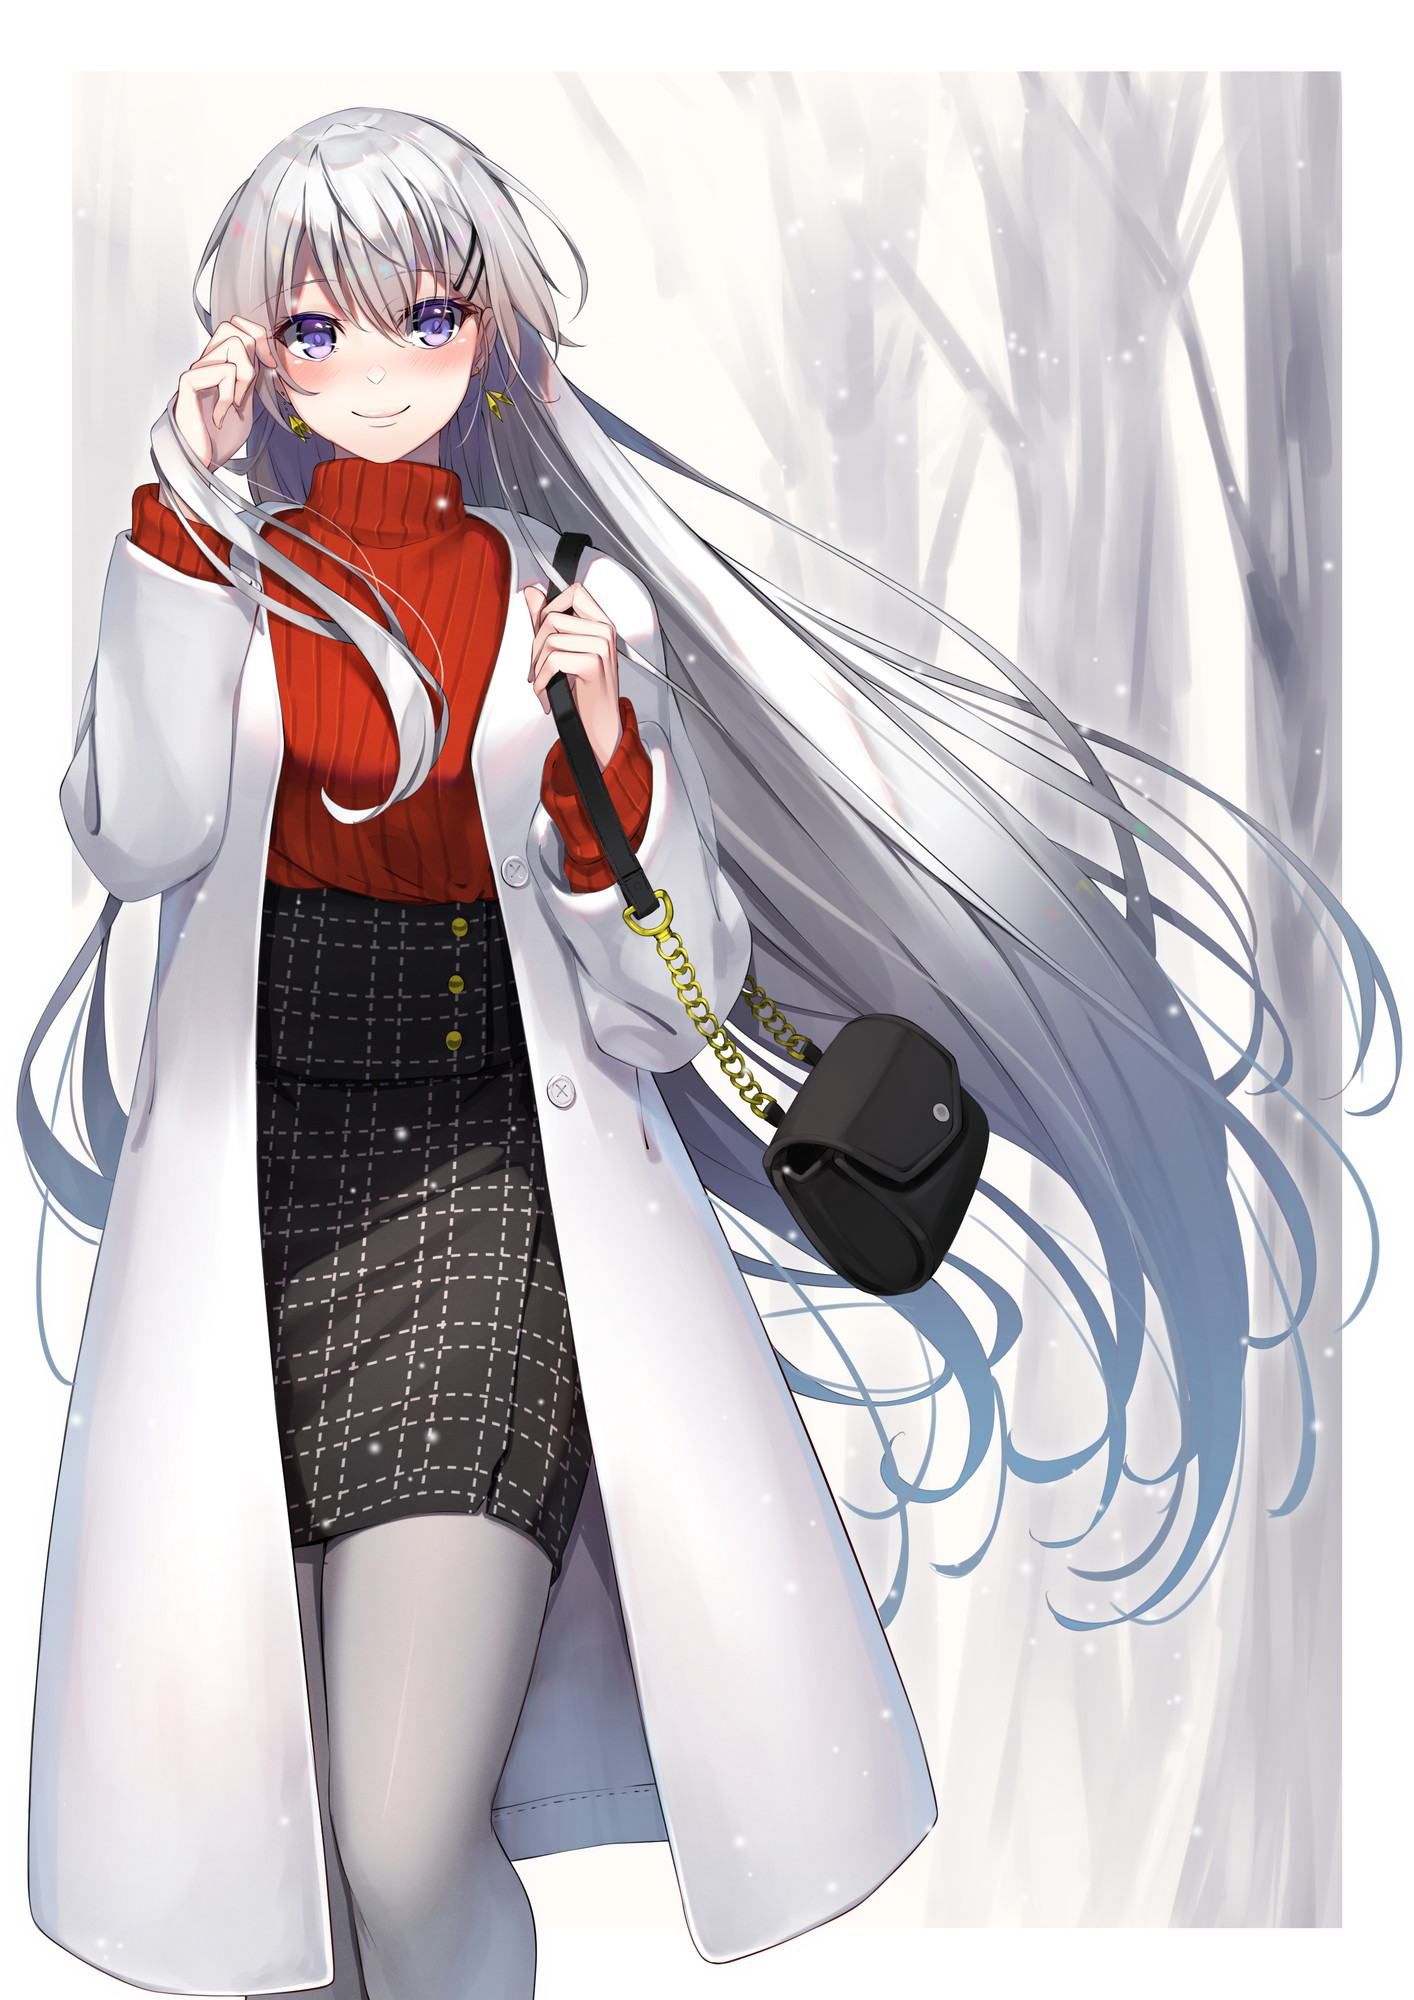 Gather people who want to see the erotic images of Azur Lane! 11